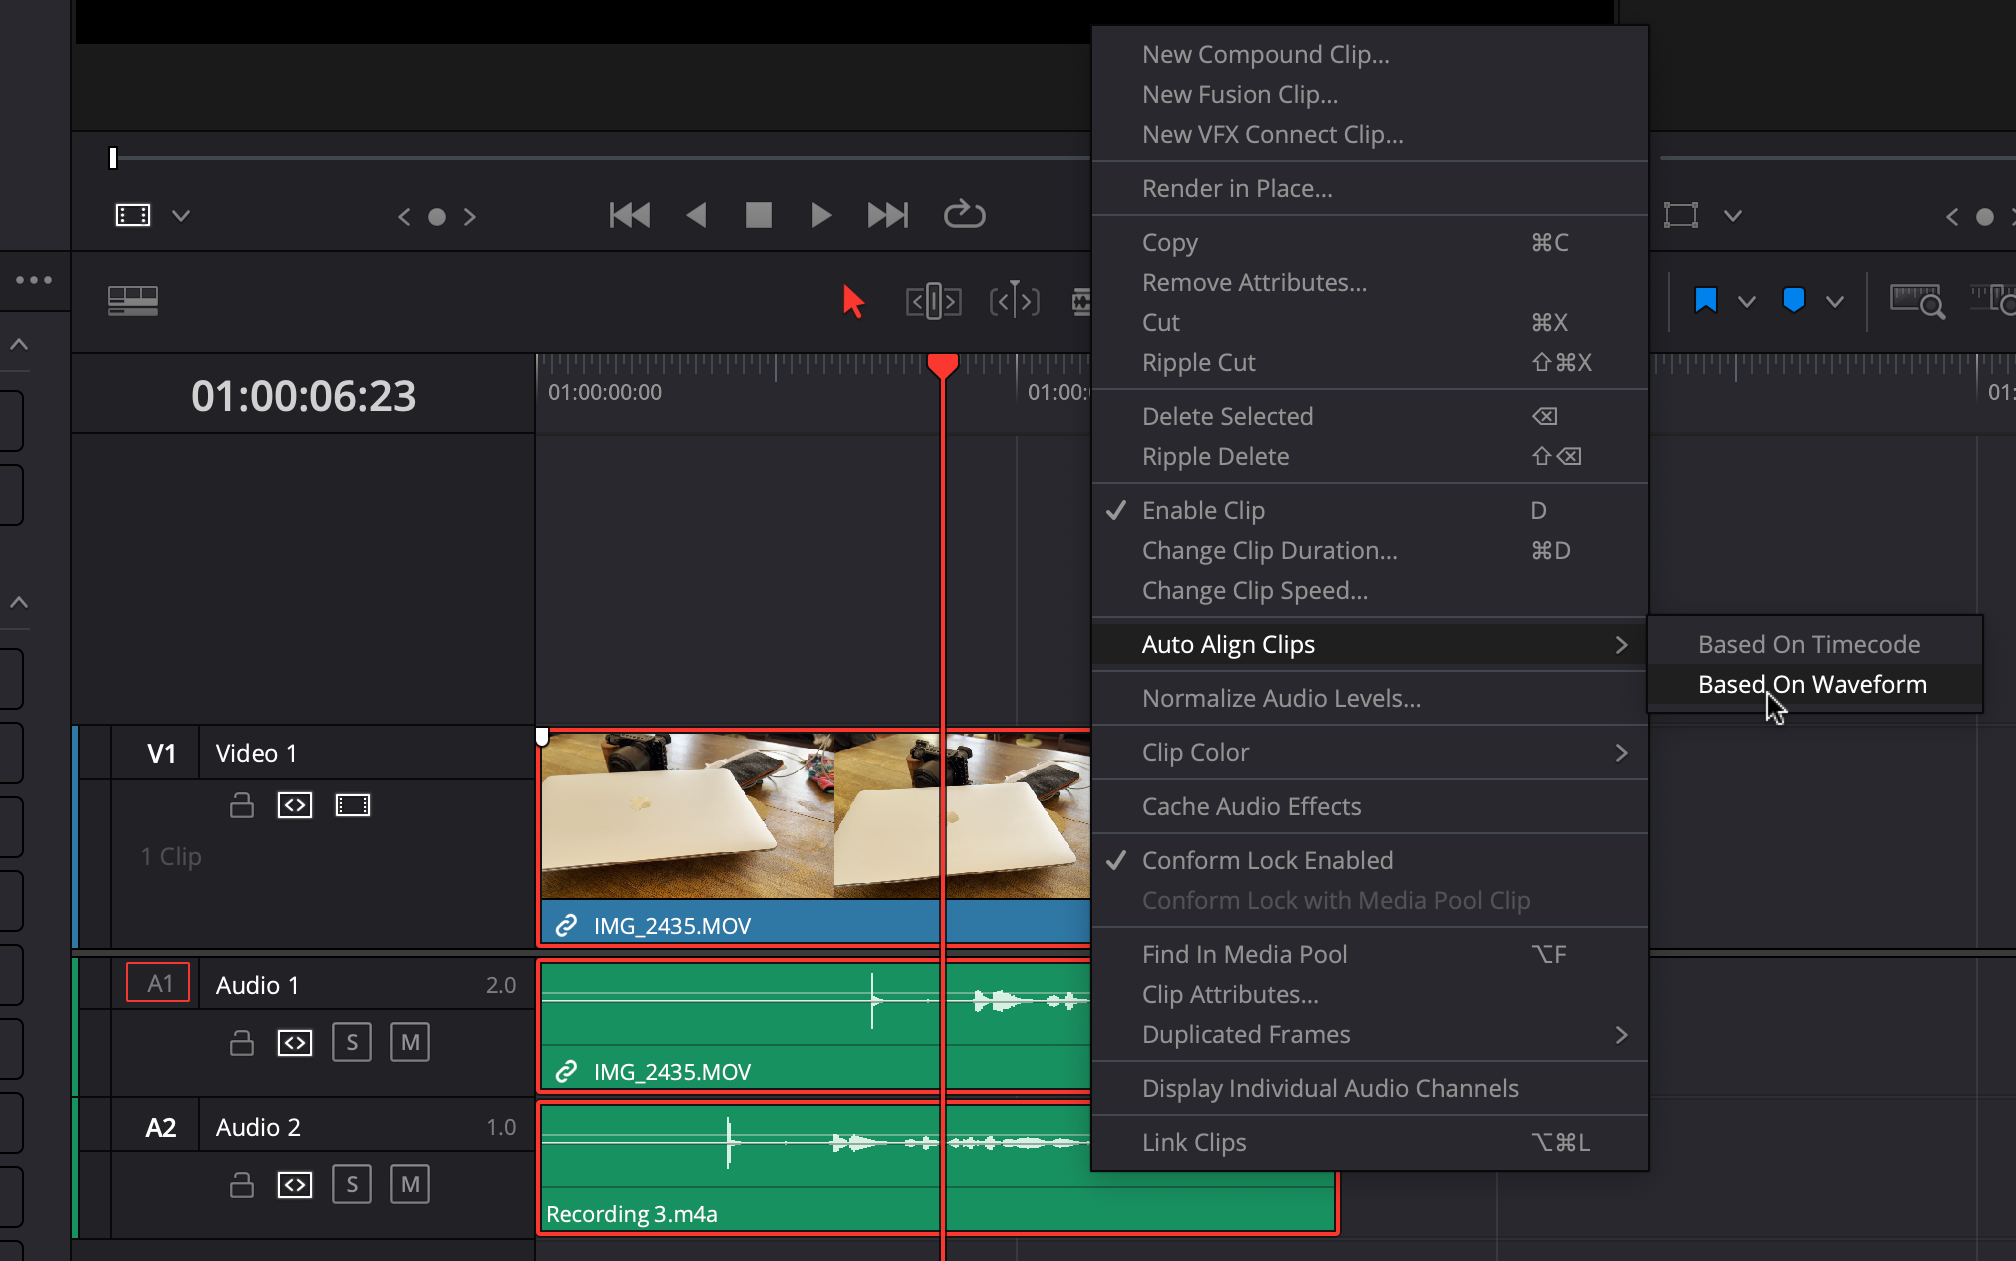 DaVinci Resolve Auto Align Clips tool in the Edit interface.